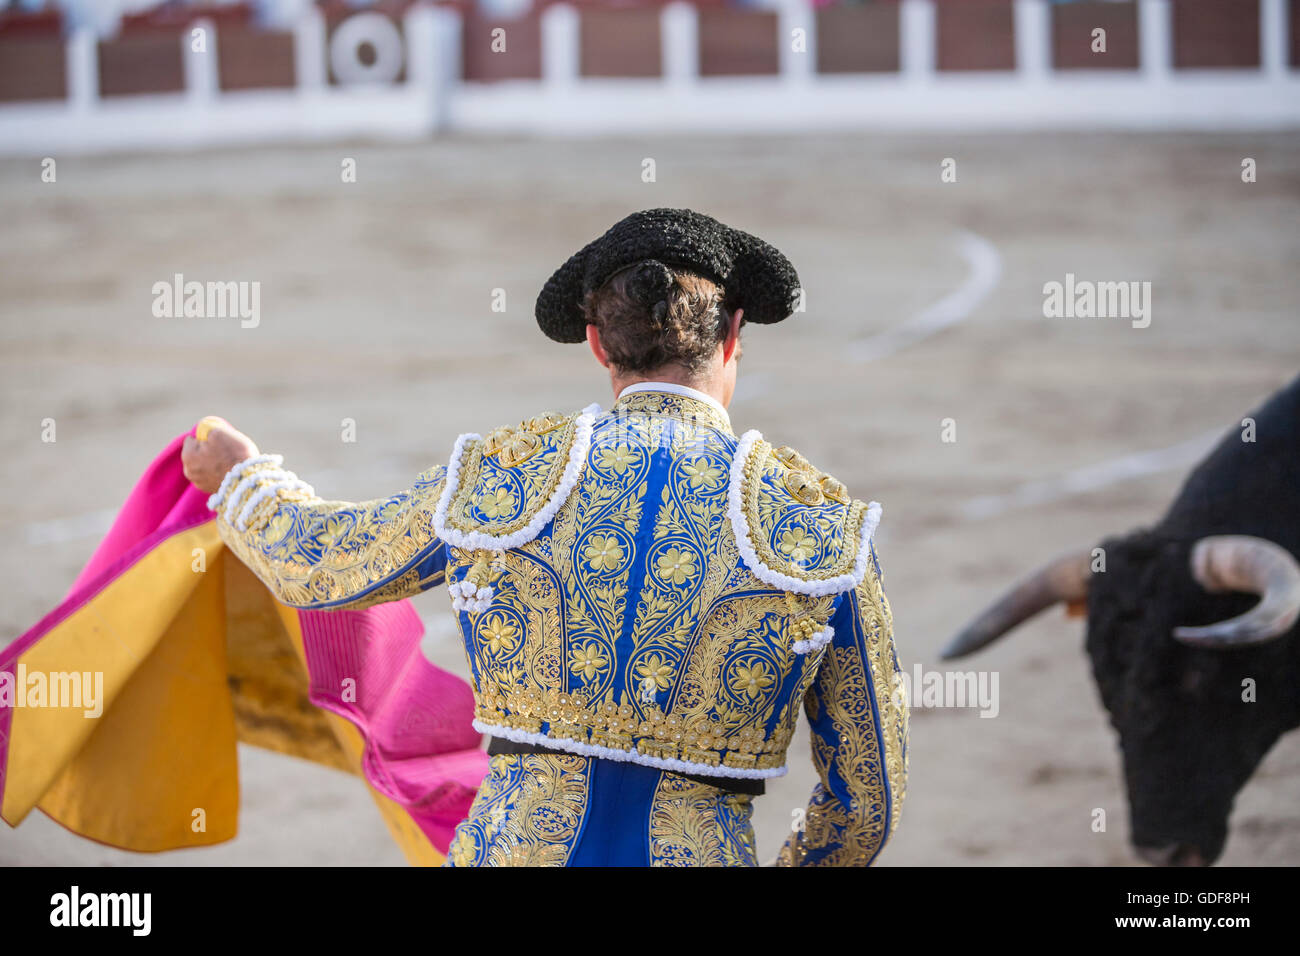 Bullfighter El Fandi bullfighting with the crutch in the Bullring of Linares, Spain Stock Photo